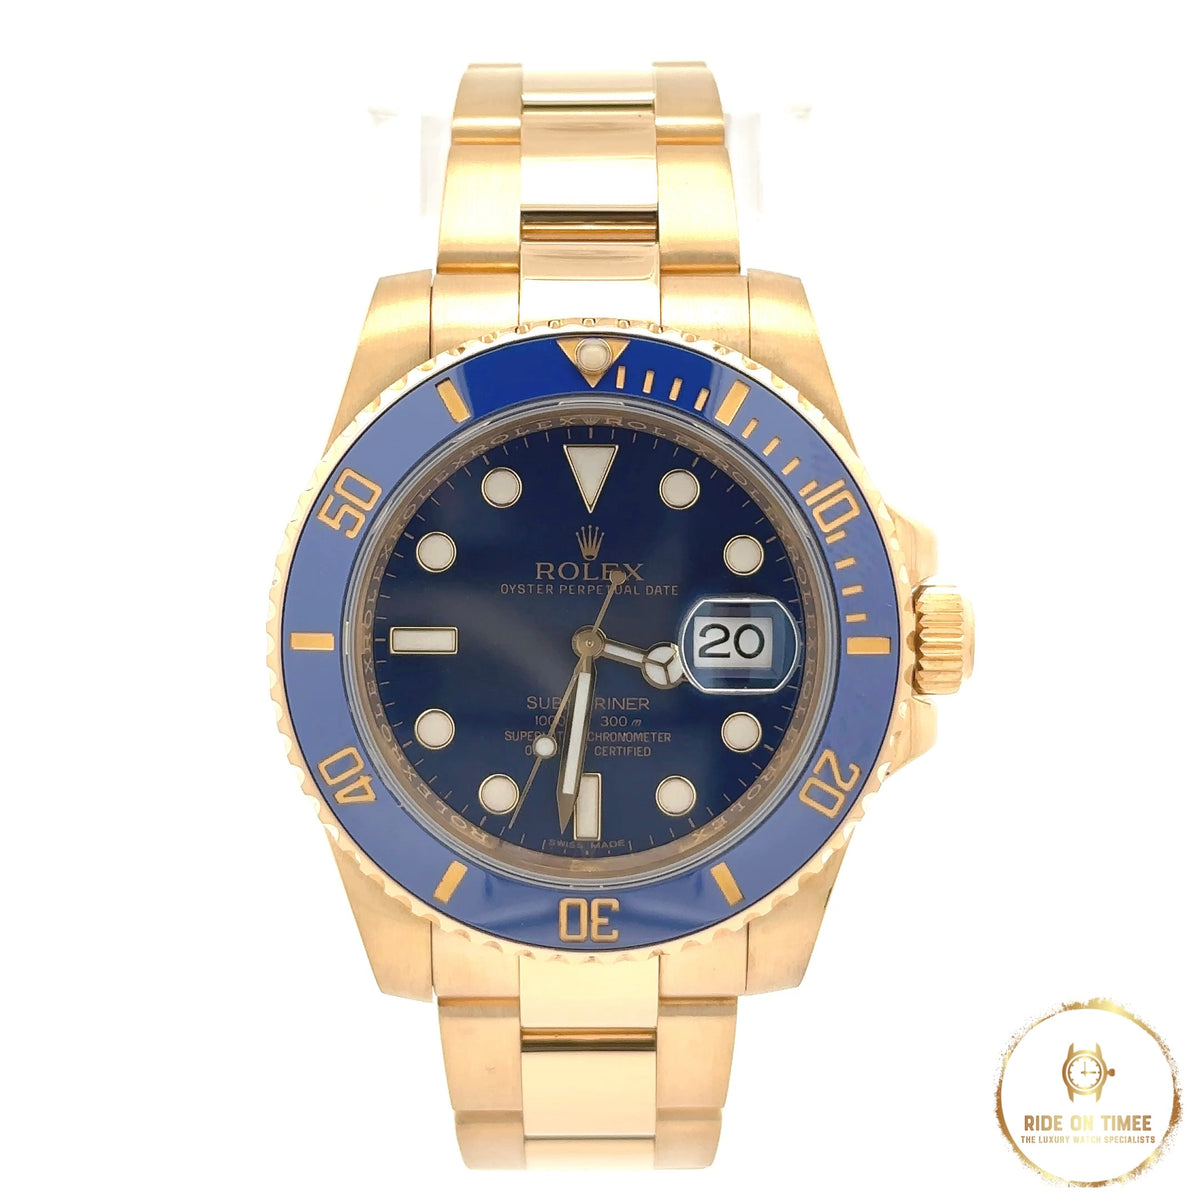 Rolex Submariner Date 40 18k Yellow Gold Factory Blue Dial ‘116618LB’ - Ride On Timee